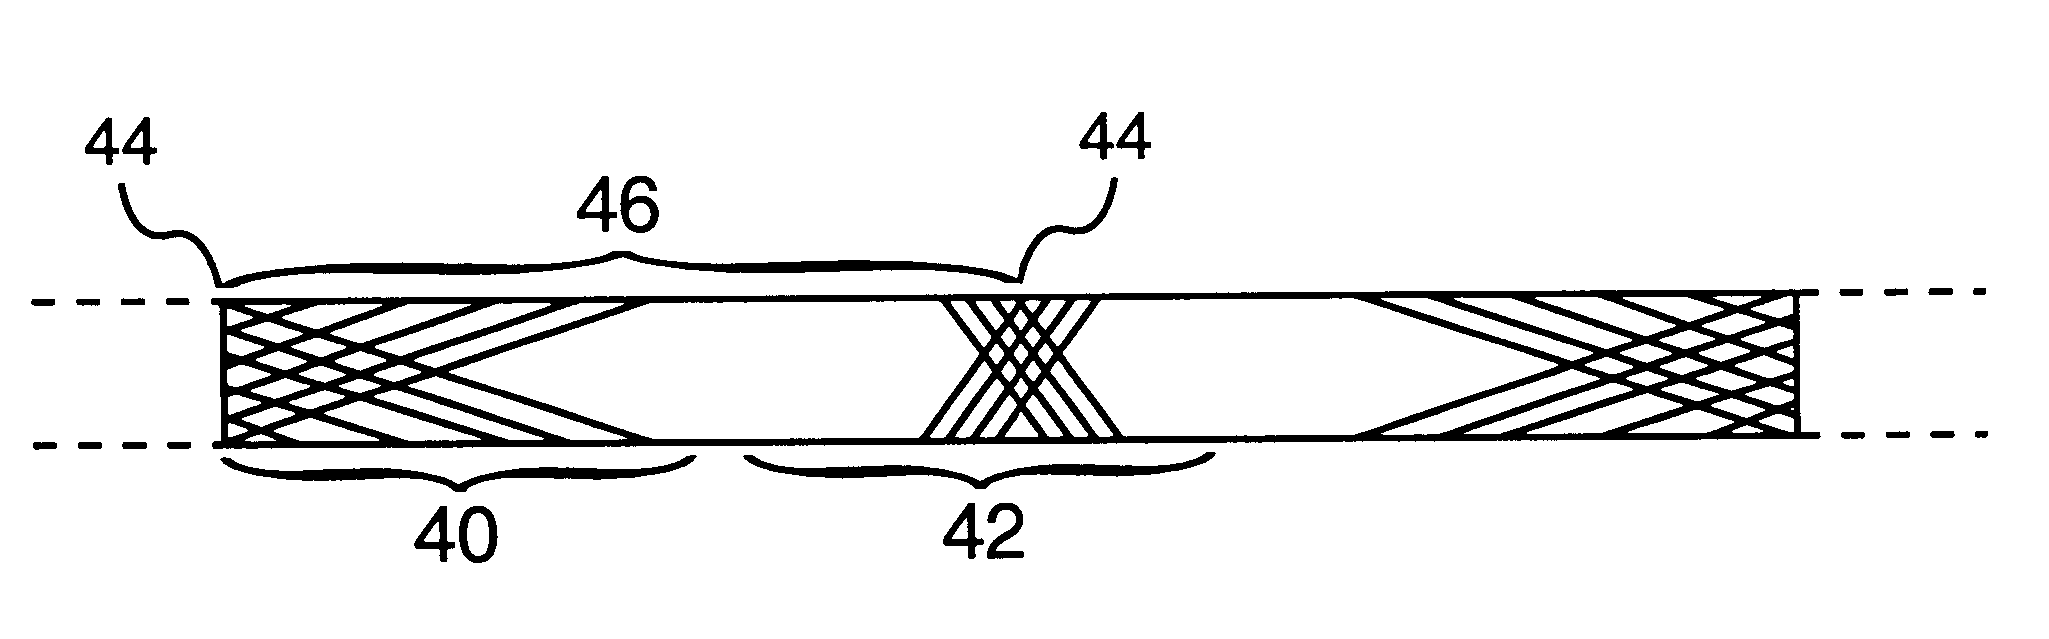 Fiber-reinforced composite product with graded stiffness